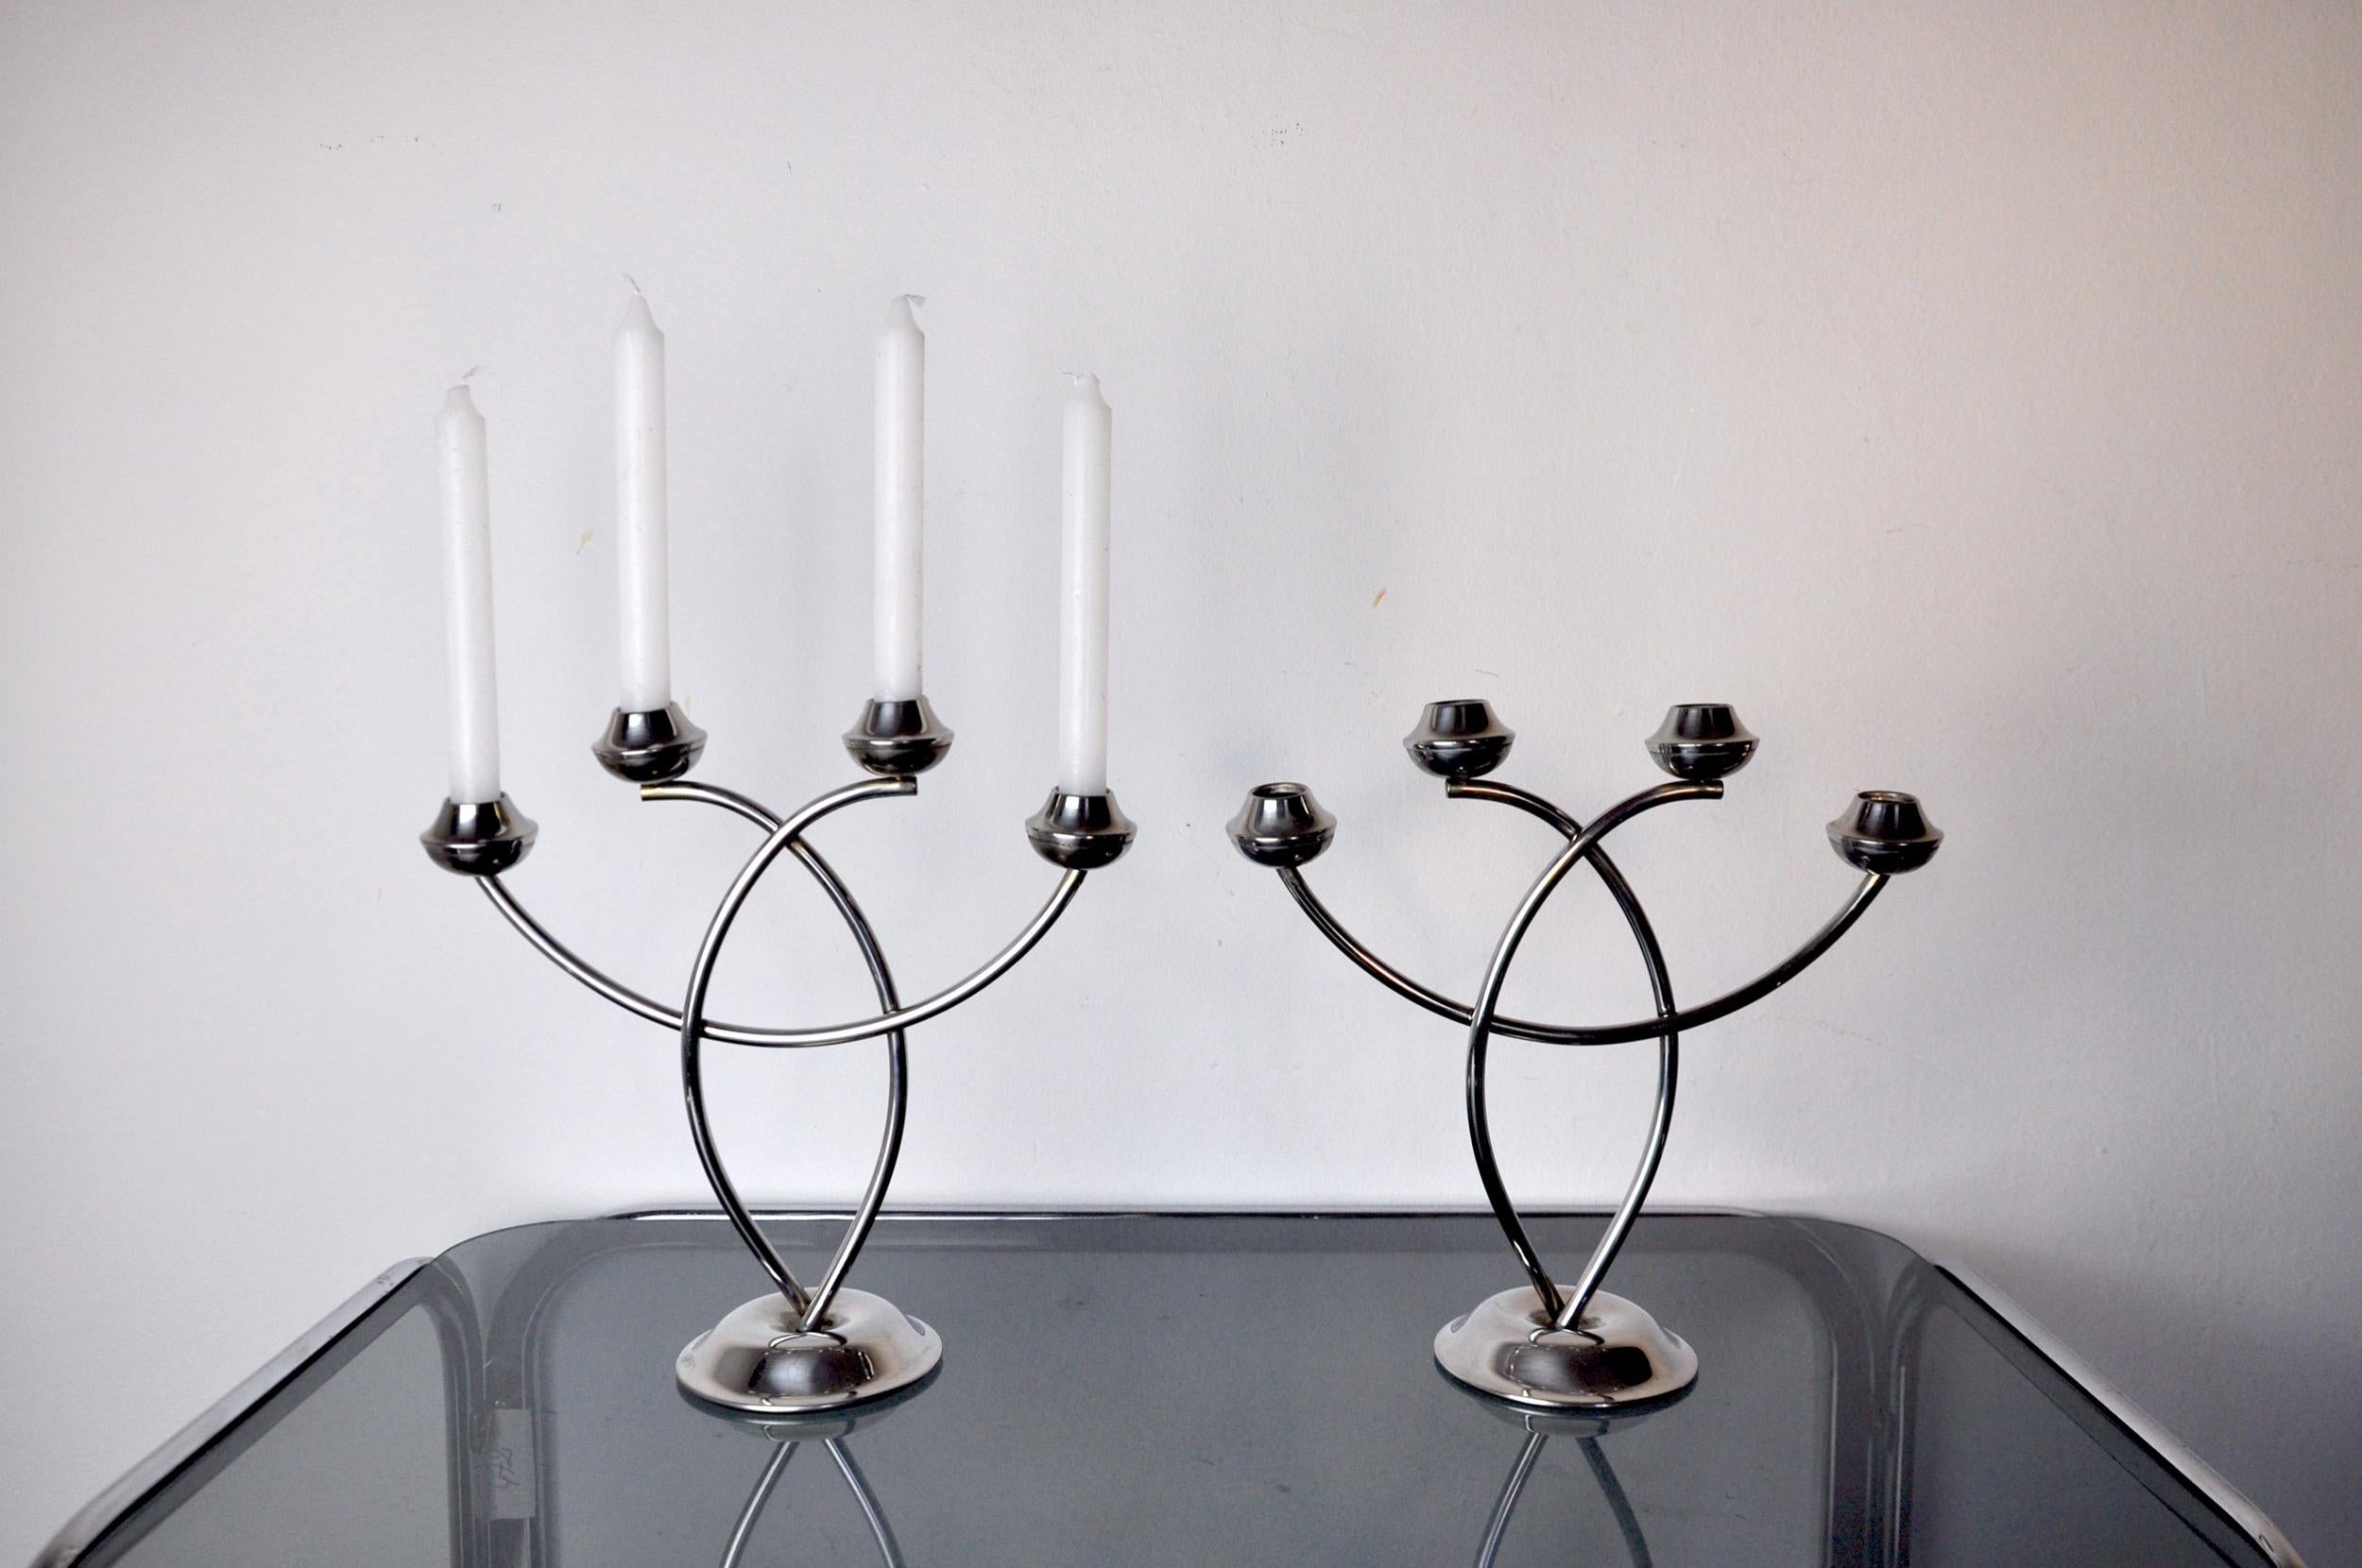 Very beautiful pair of art deco candlesticks in stainless steel designed and produced in spain in the 1970s.

Structure in stainless steel 18/8 that can accommodate 4 candles.

Superb design object will decorate your interior